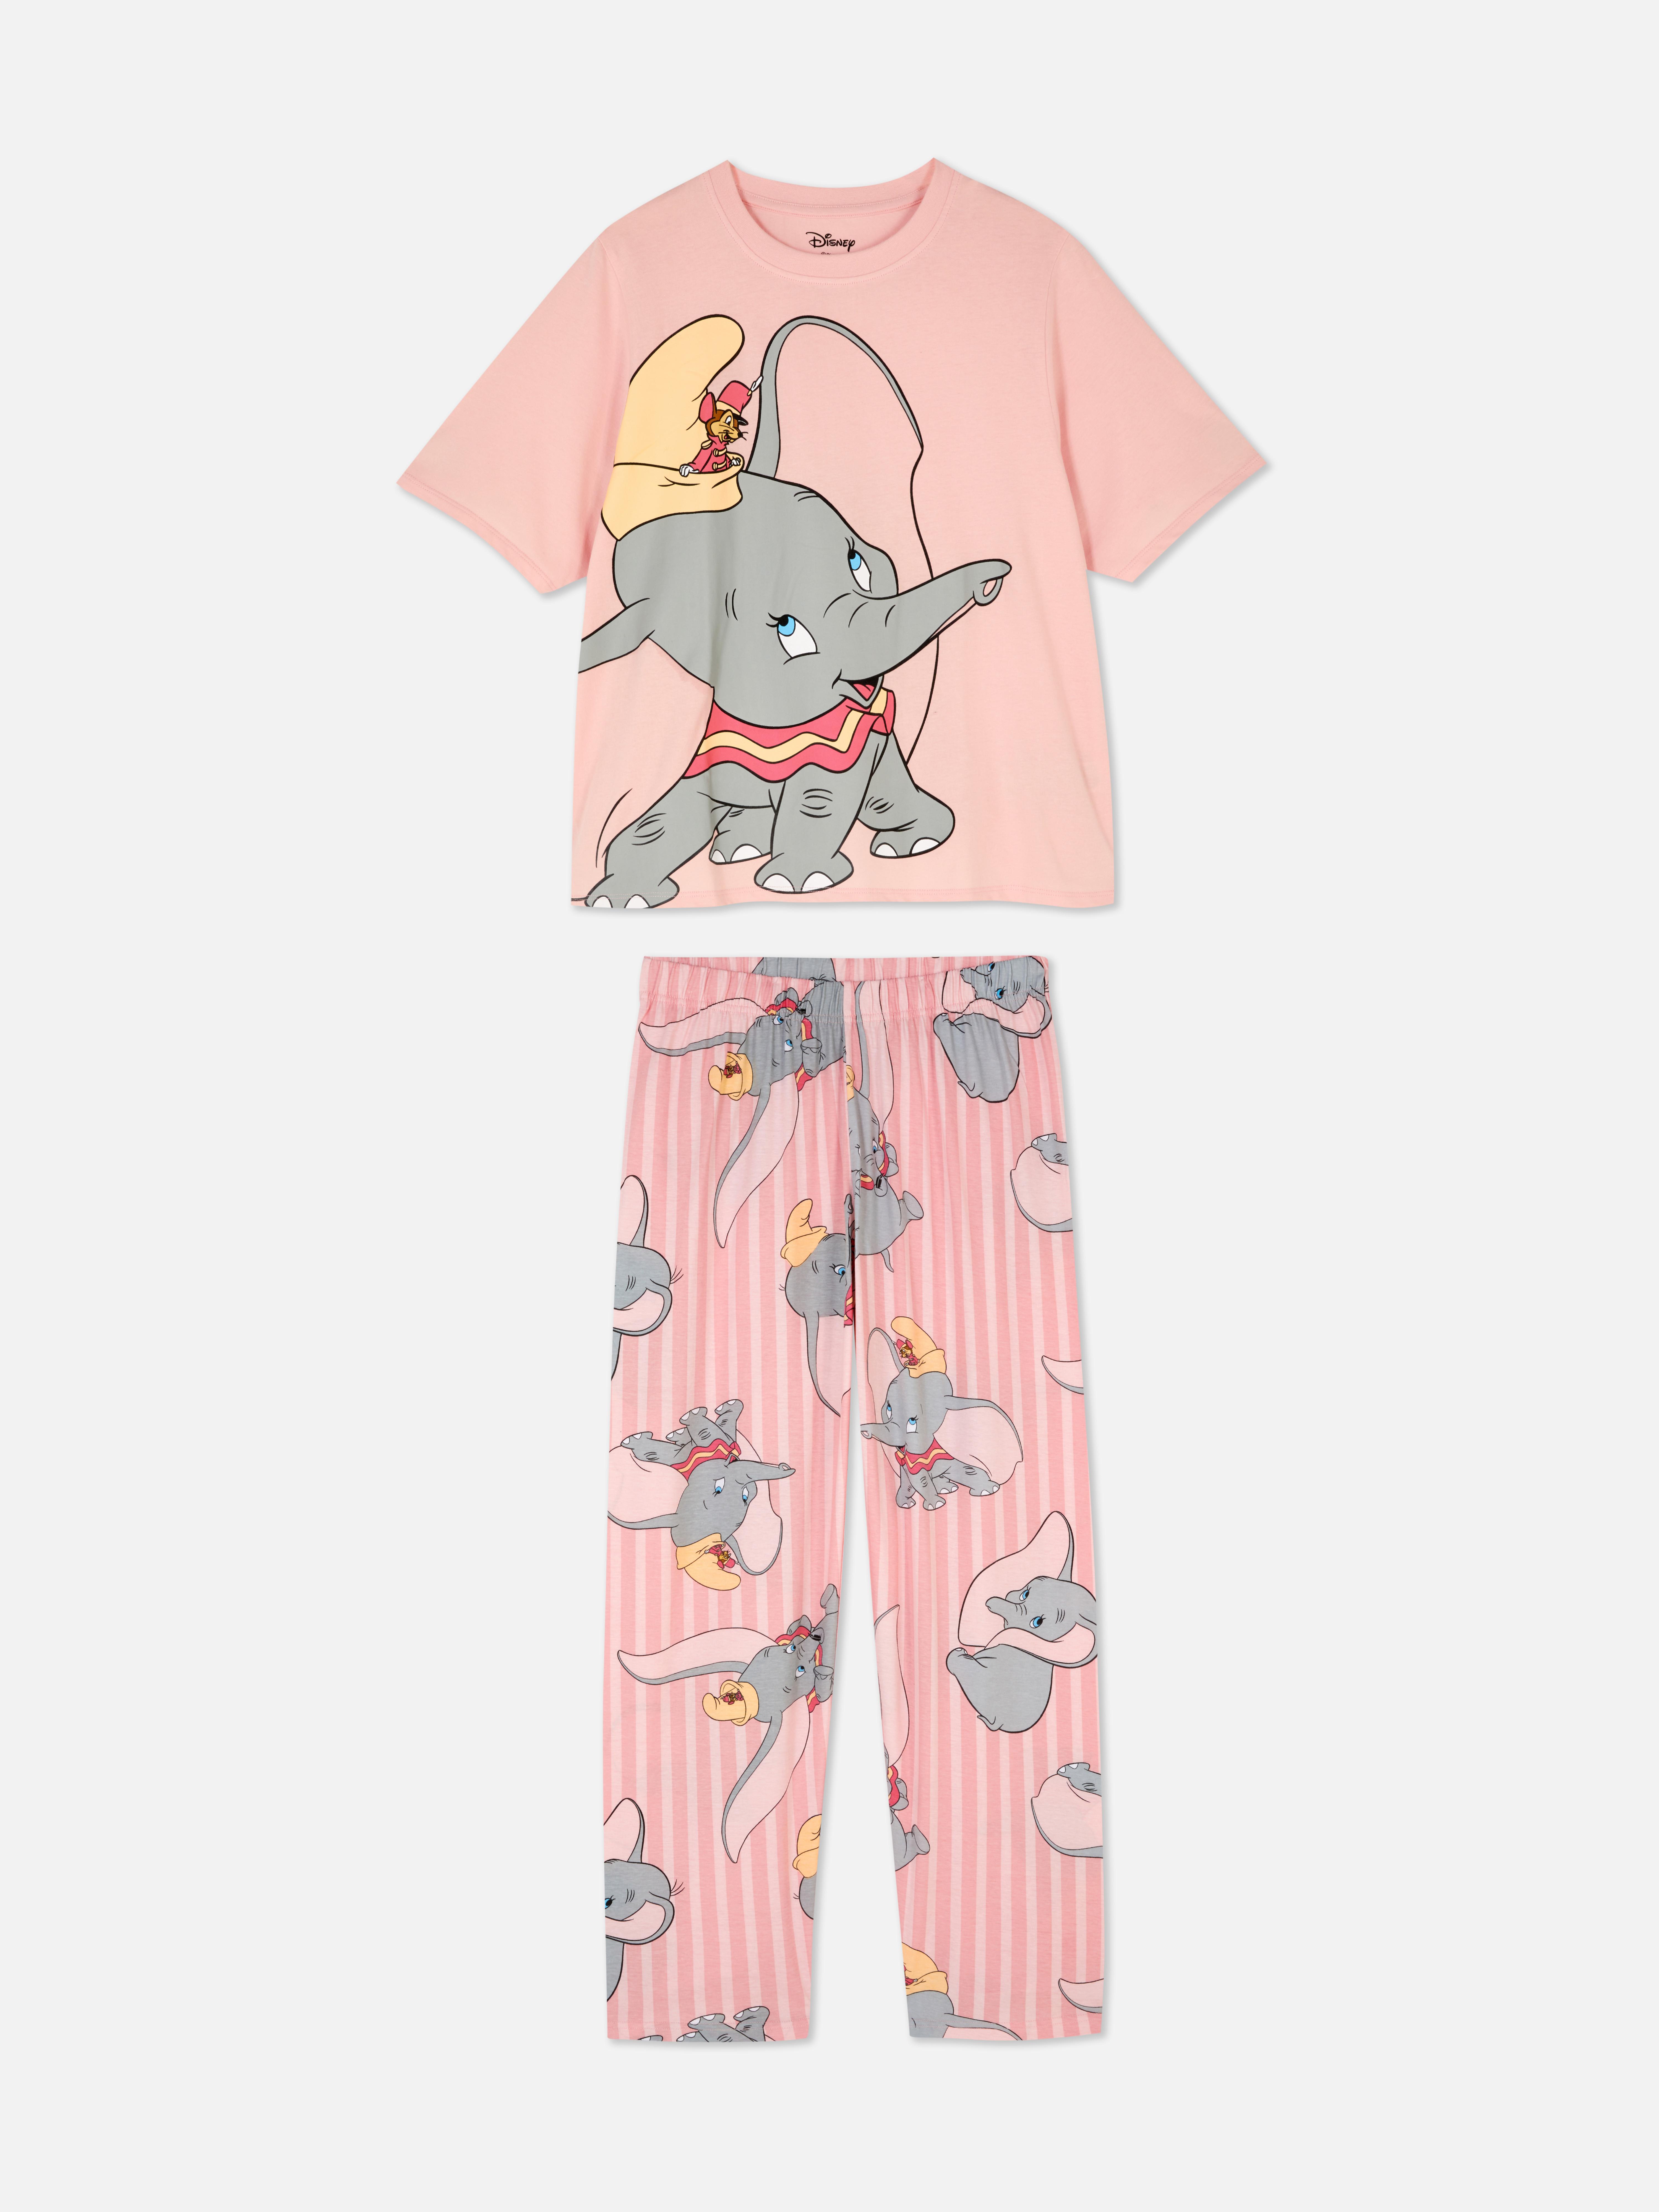 Primark Love to Lounge Fleece Pyjamas in different Style  of course with  two Styles of Cats :D 8 € / 10 €